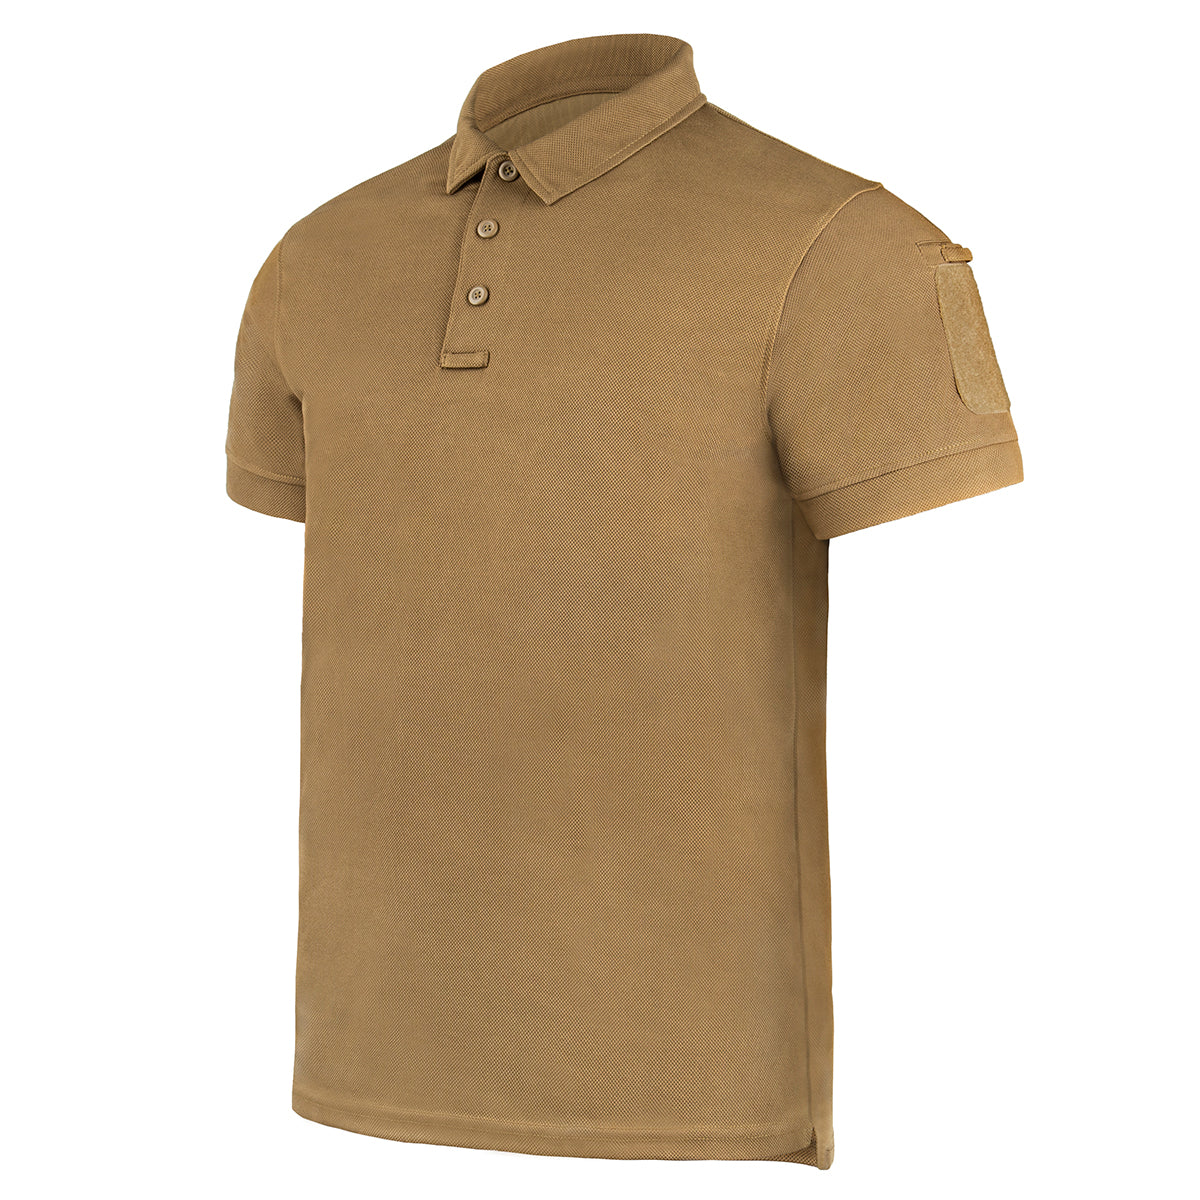 Mil-Tec Tactical Quickdry Coyote Polo shirt